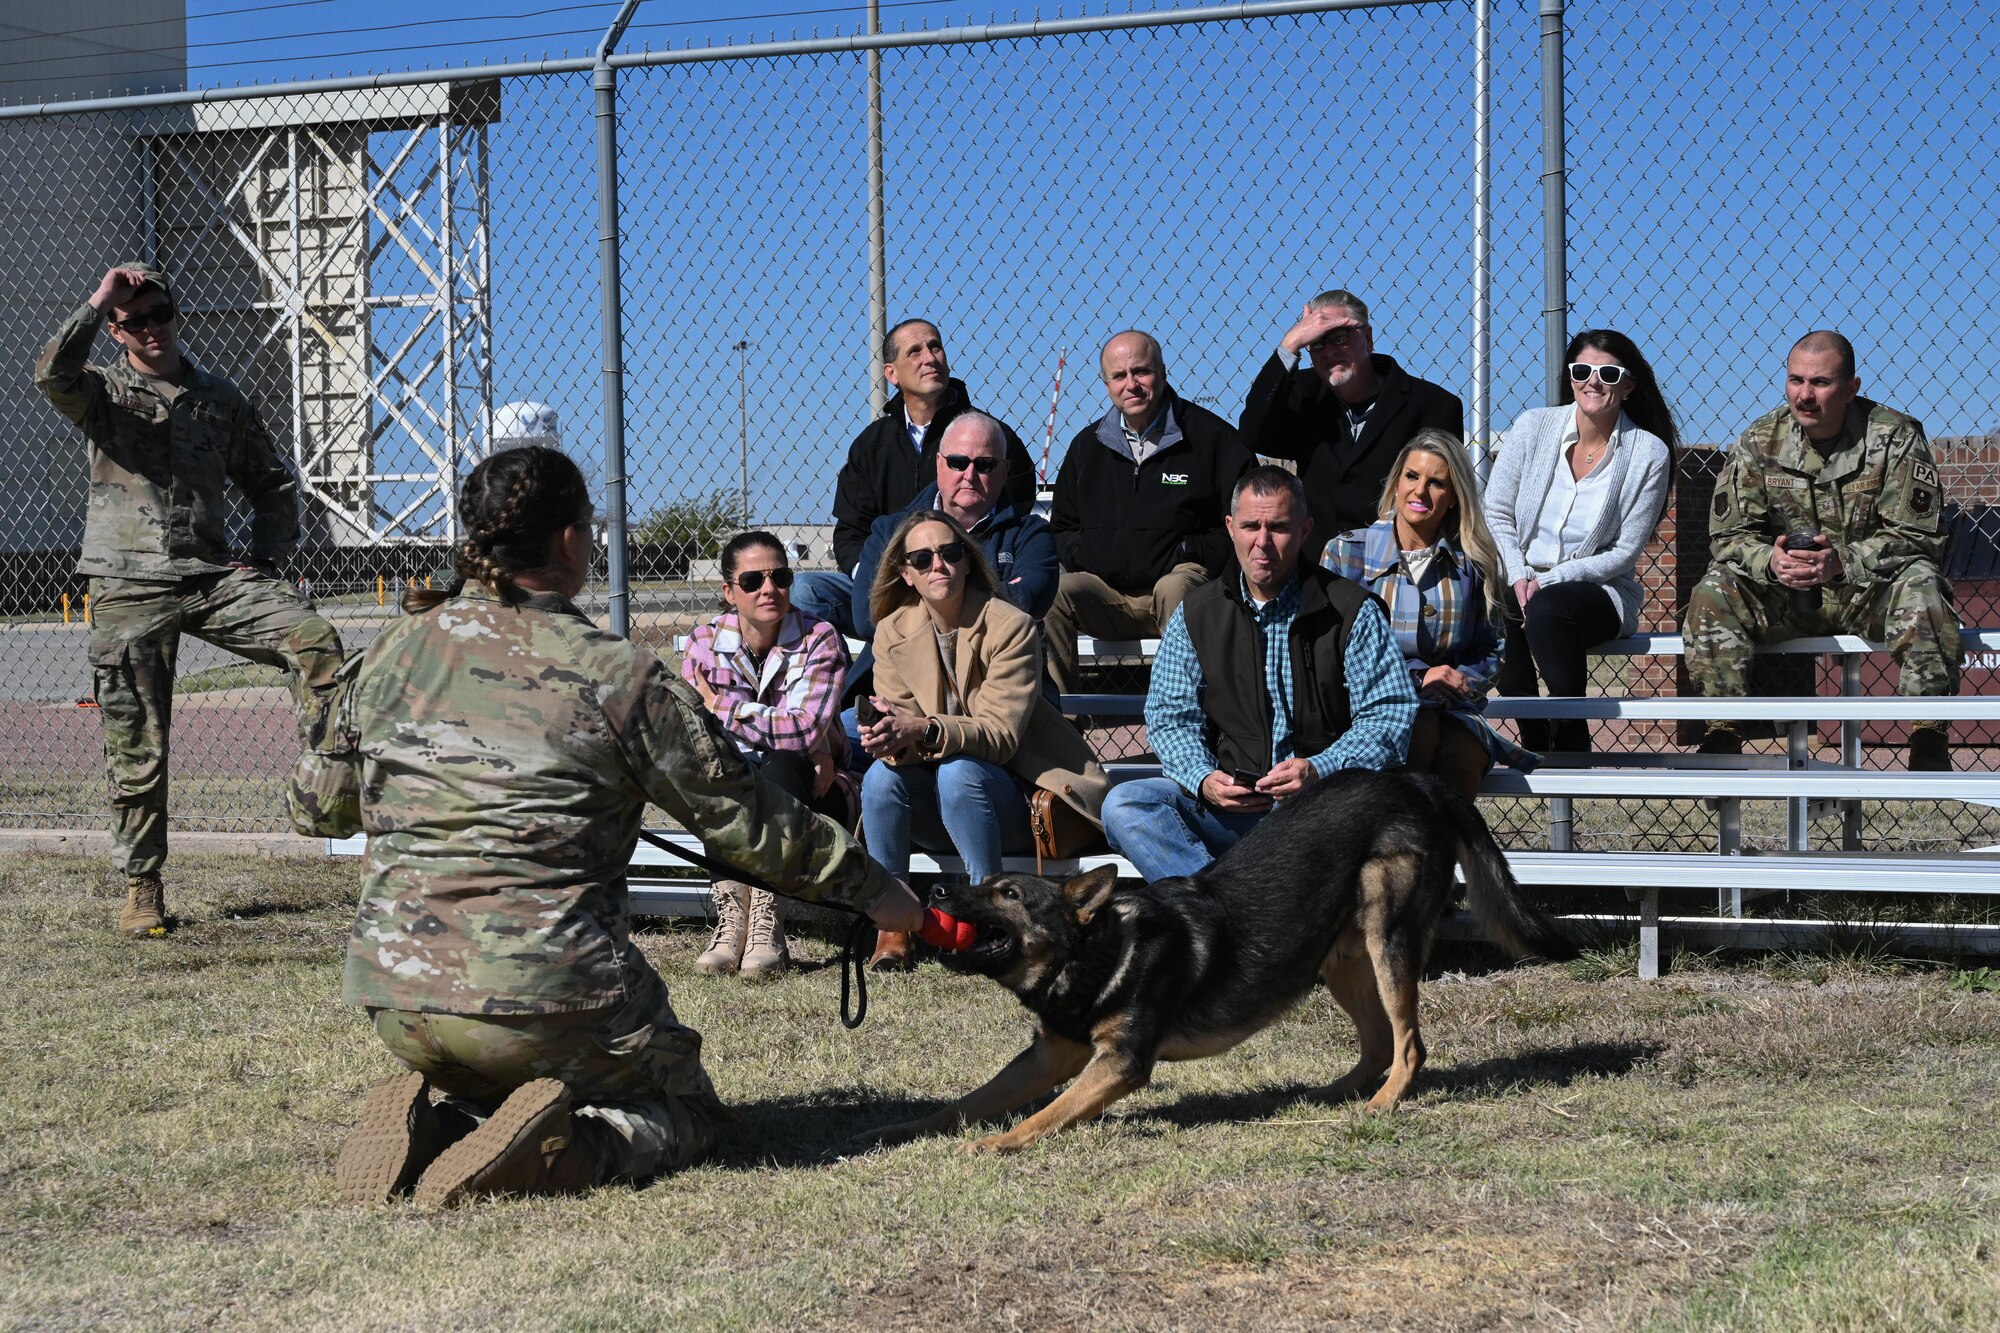 U.S. Air Force Senior Airman Kaitlynd Newland, 97th Security Forces Squadron (SFS) military working dog (MWD) handler, and Bingo, 97th SFS MWD, give a demonstration to members of the Altus Military Affairs Committee during an orientation tour at Altus Air Force Base, Oklahoma, Nov. 2, 2023. Newland and Bingo demonstrated attack training and running through an obstacle course, both of which provide the dog and the handler with training in case of real-life scenarios. (U.S. Air Force photo by Senior Airman Miyah Gray)